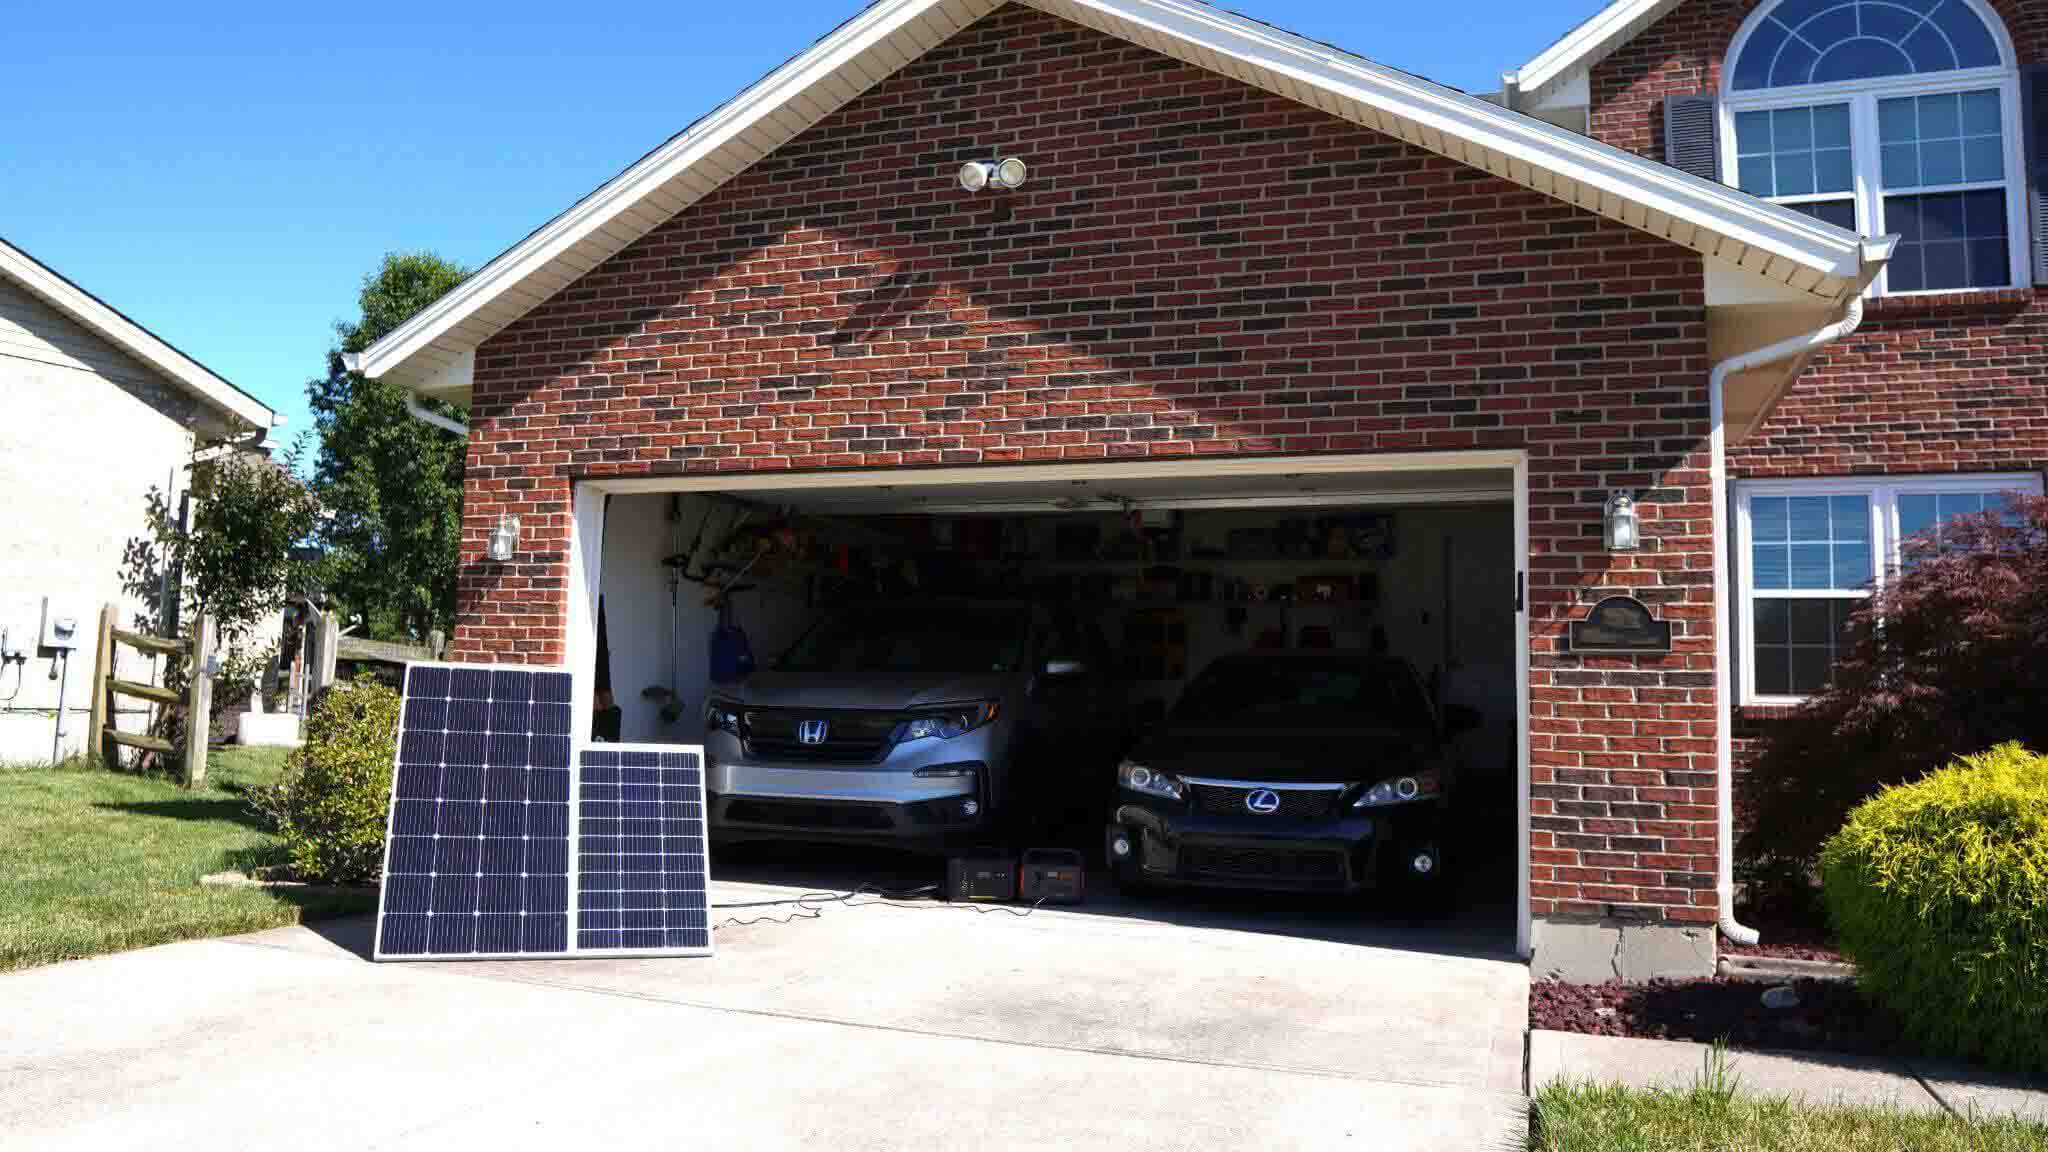 Durable and high-efficiency, monocrystalline panels are the best types for house and commercial use. With 5 peak sun hours a day, about sixteen 400W solar panel is enough to power a 2,000 square foot home that consumes 22.4~32 kWh daily.